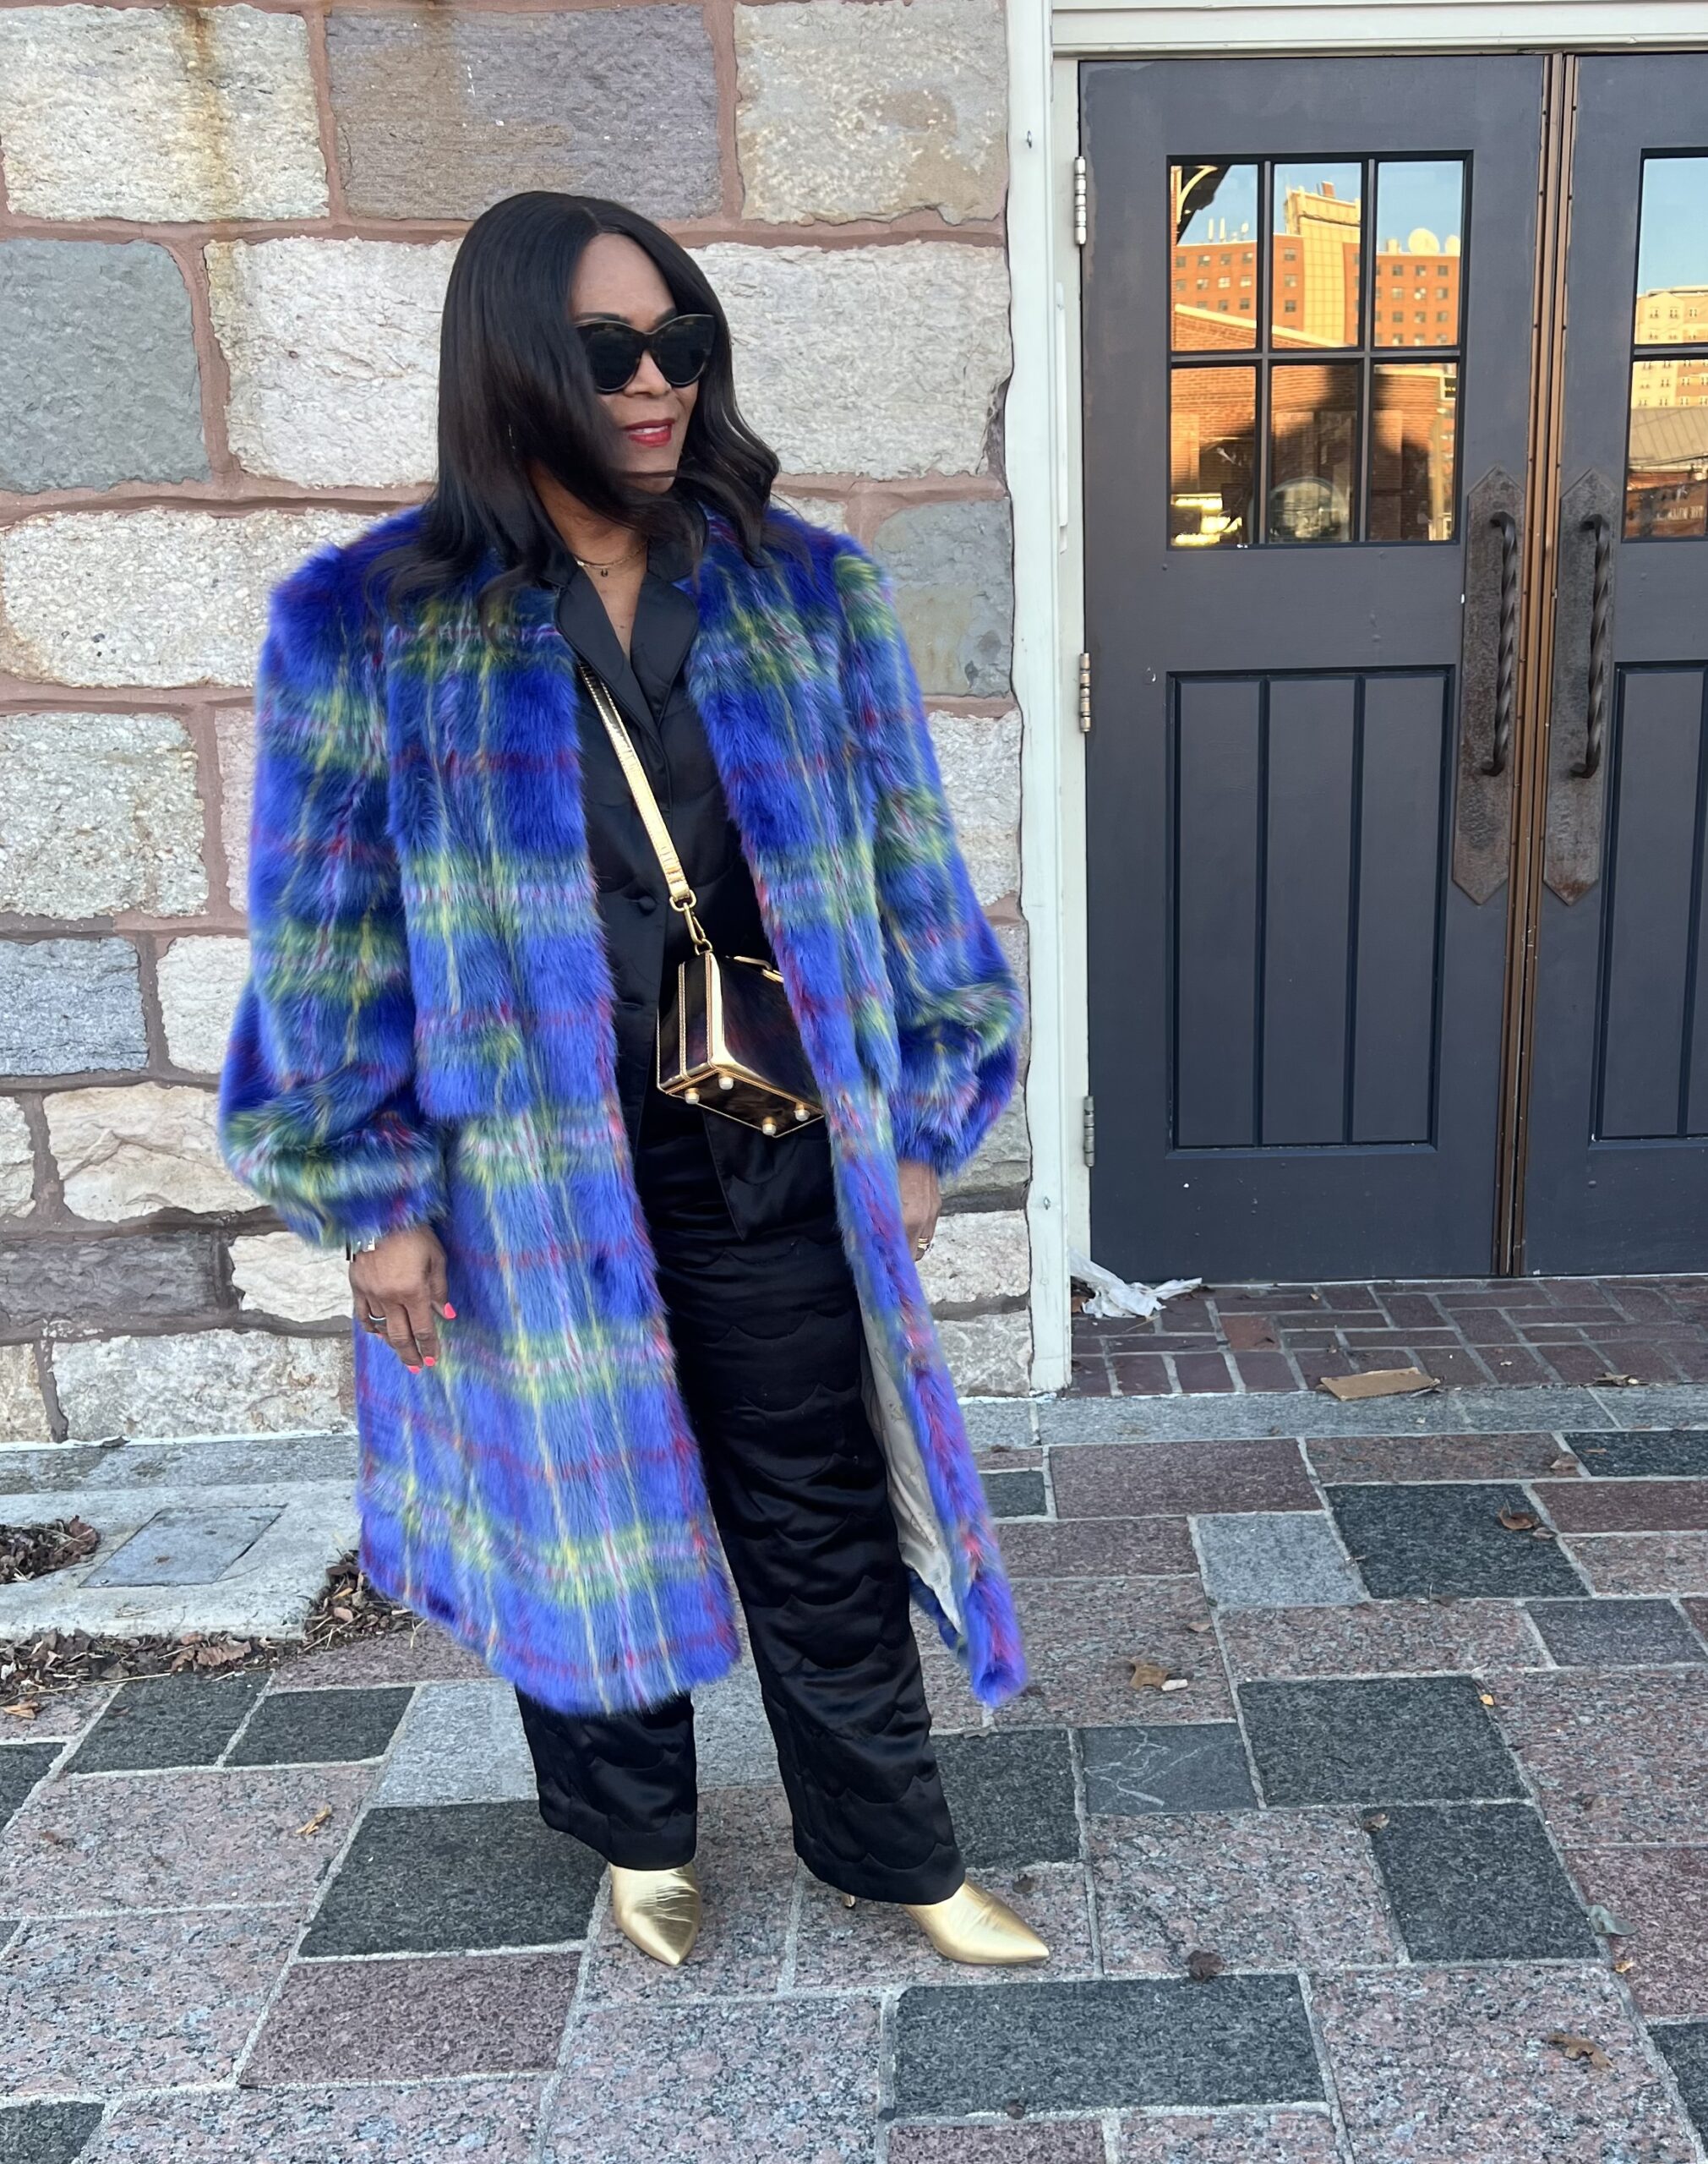 Over 50 Fashion: Shrimps Plaid Faux Fur from The Outnet